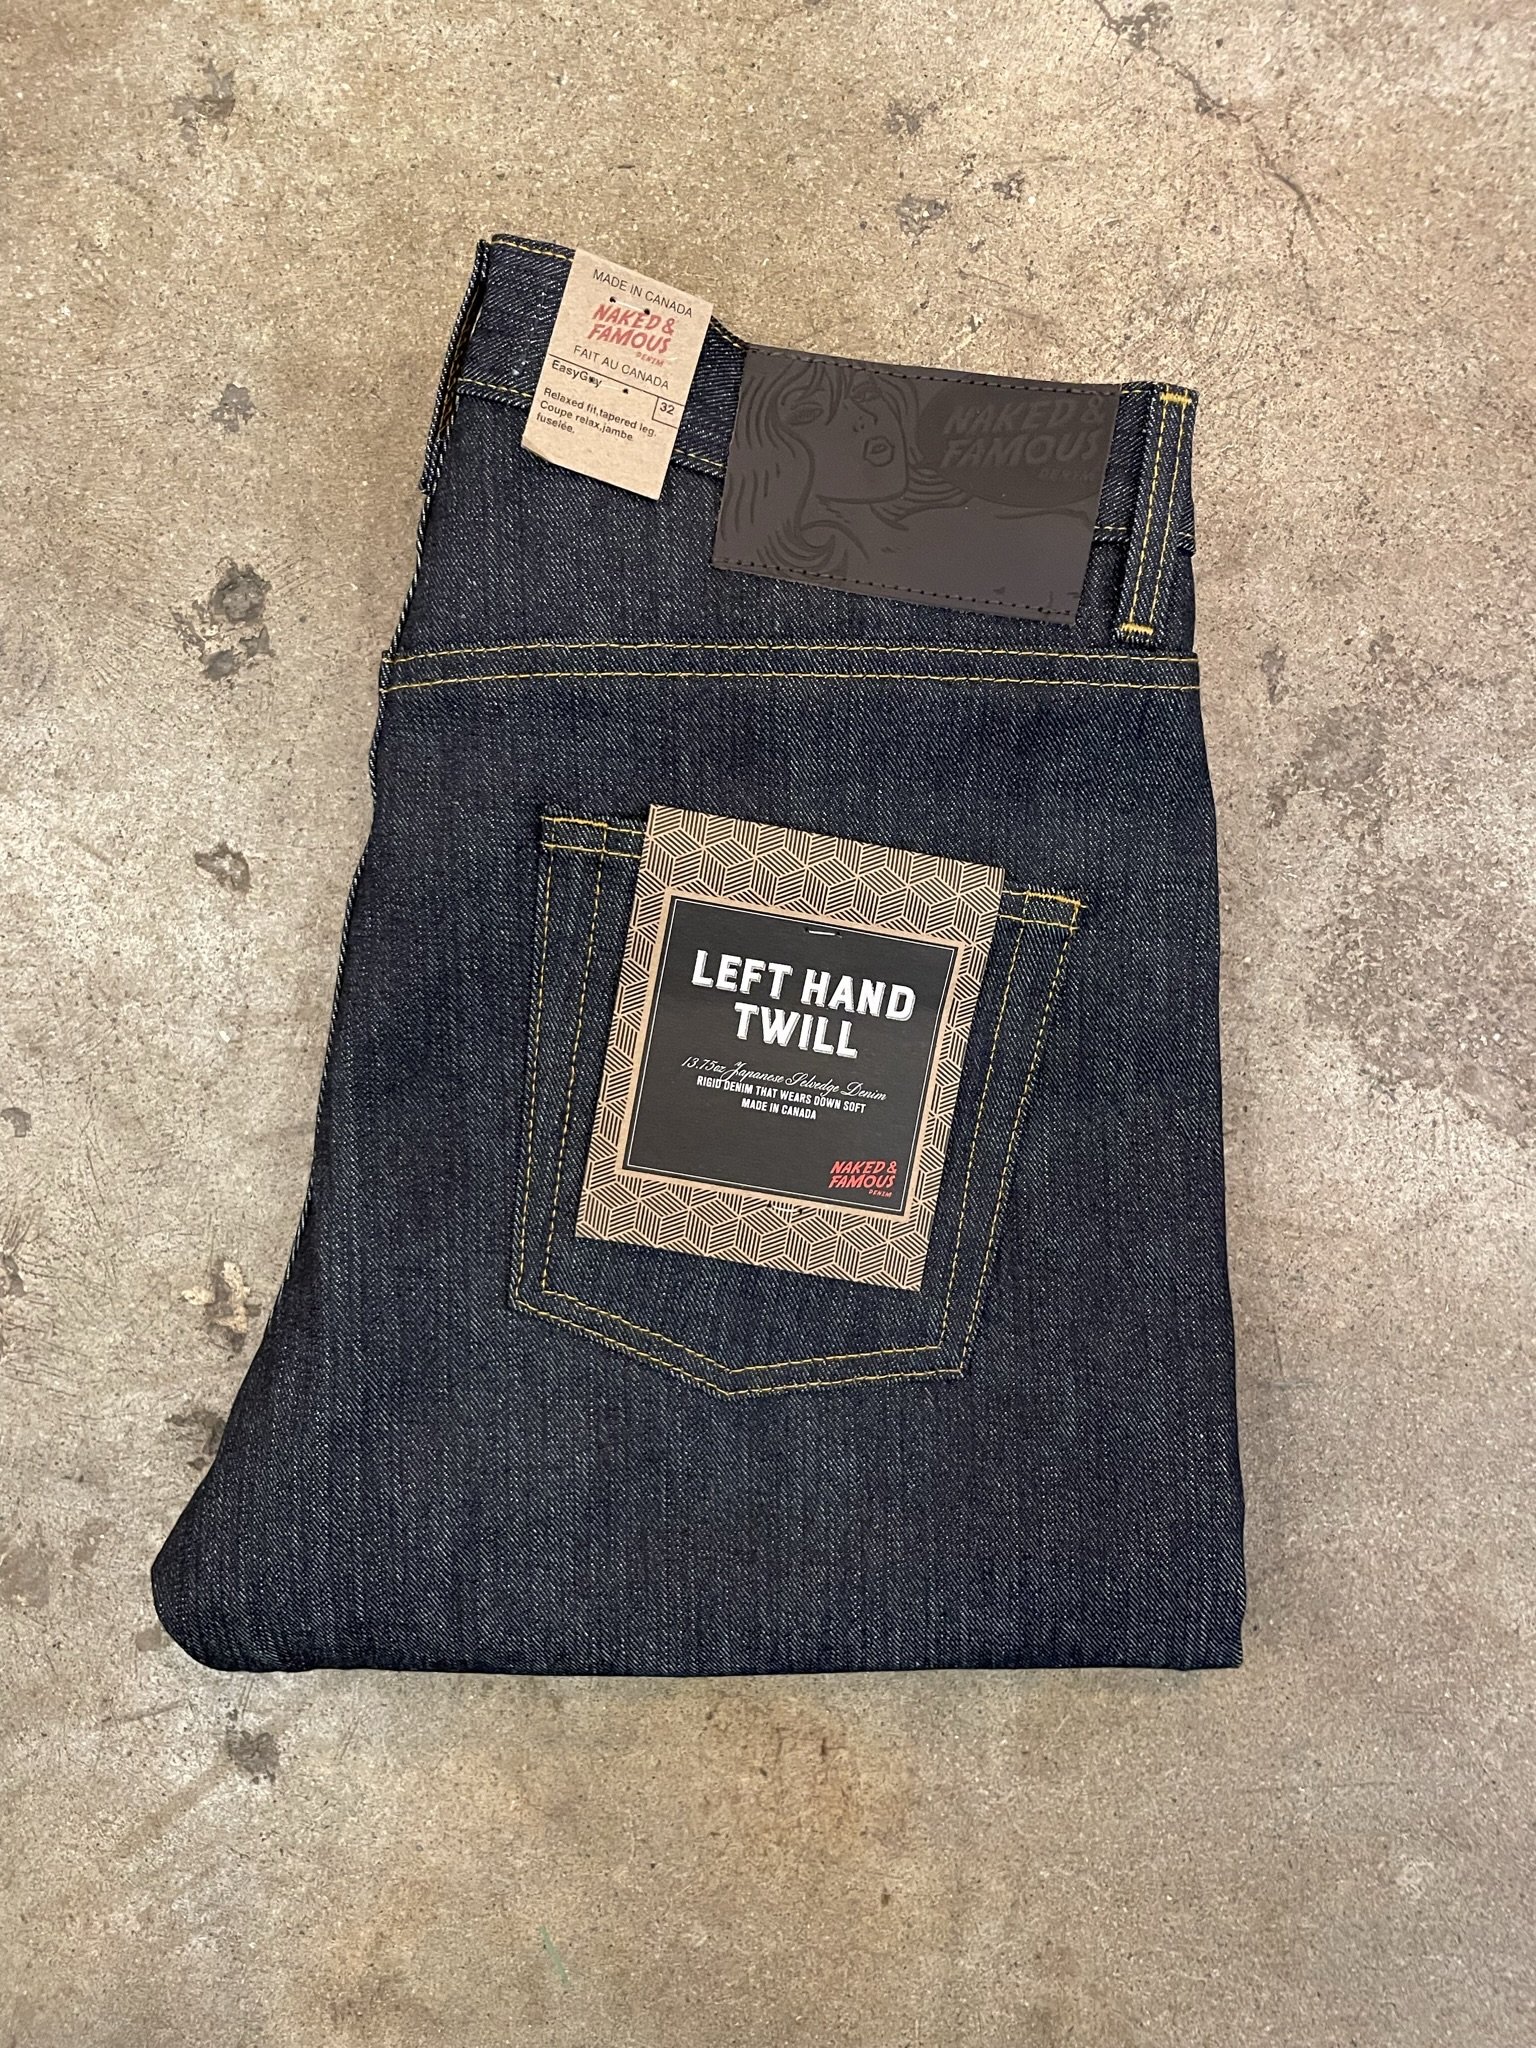 Timber Trade Co.- Selvedge Denim and Curated Menswear